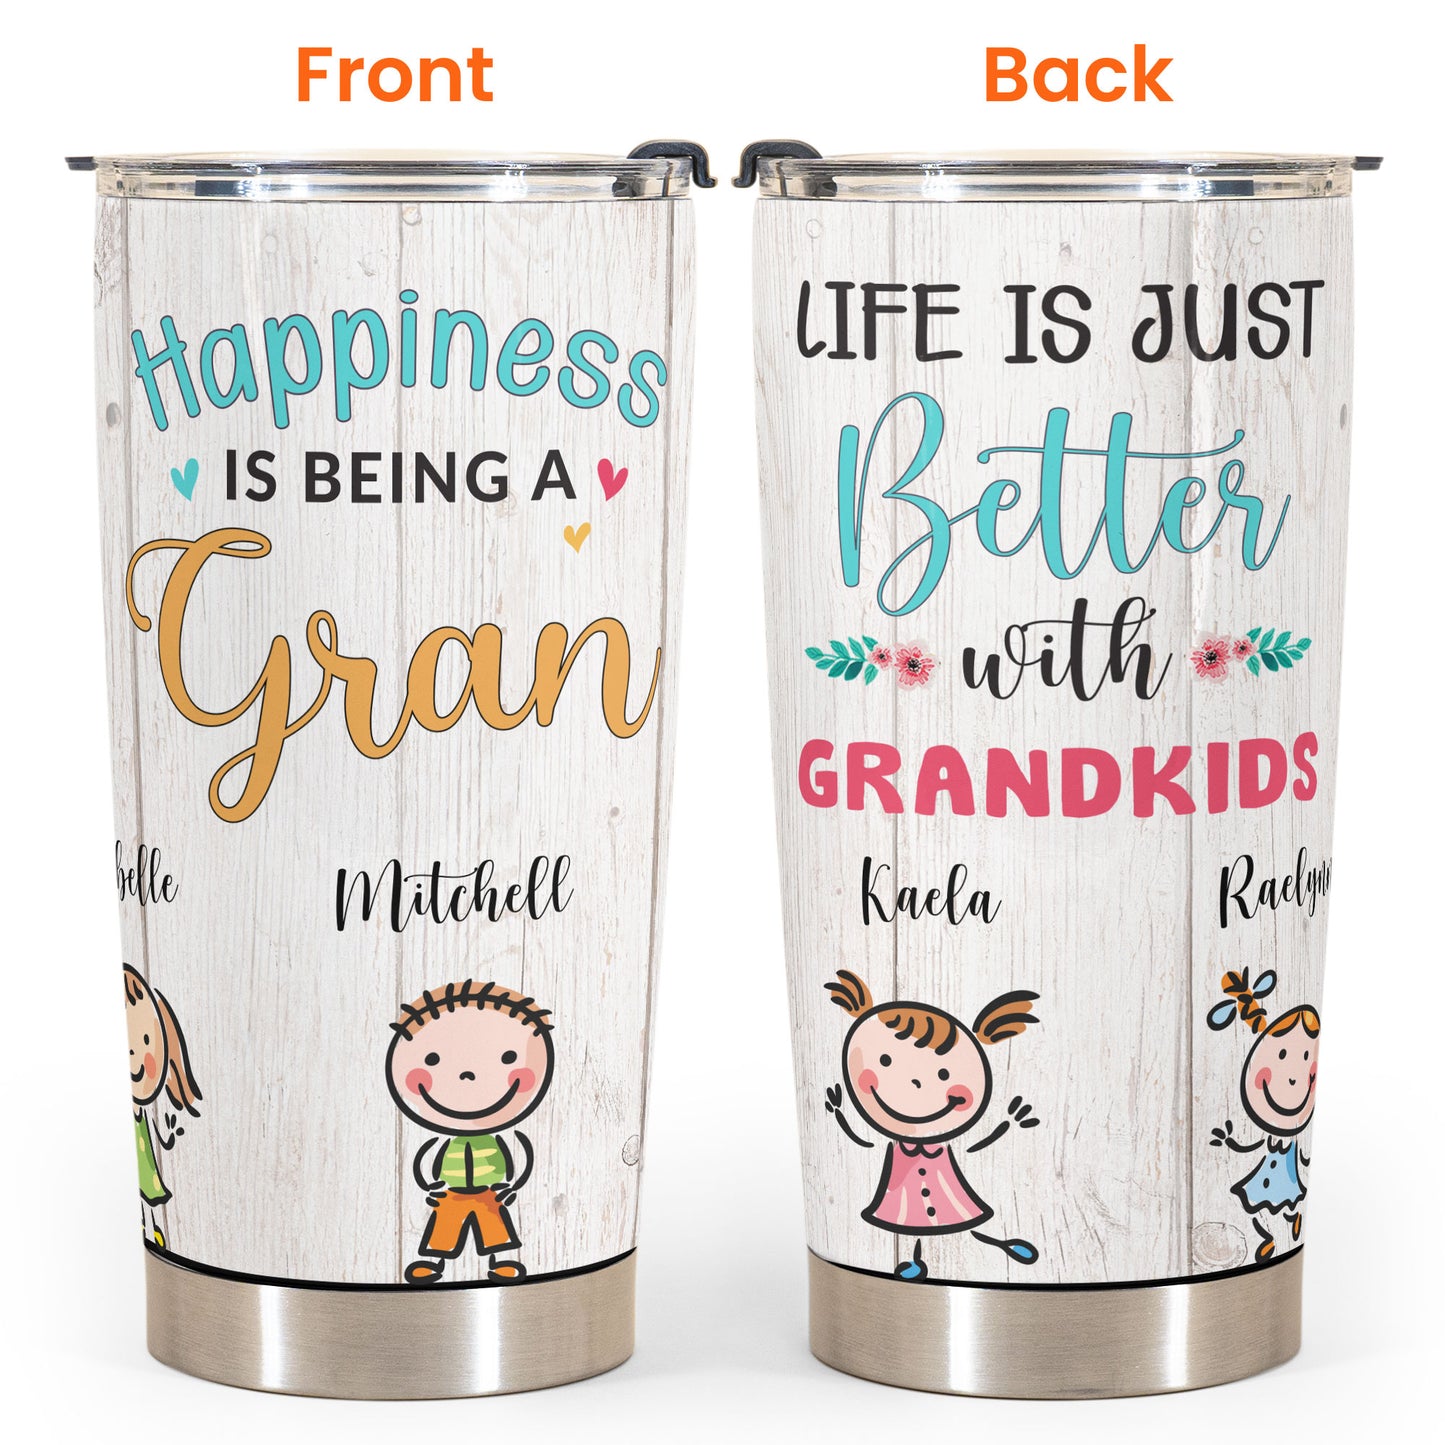 Life Is Just Better With Grandkids - Personalized Tumbler Cup